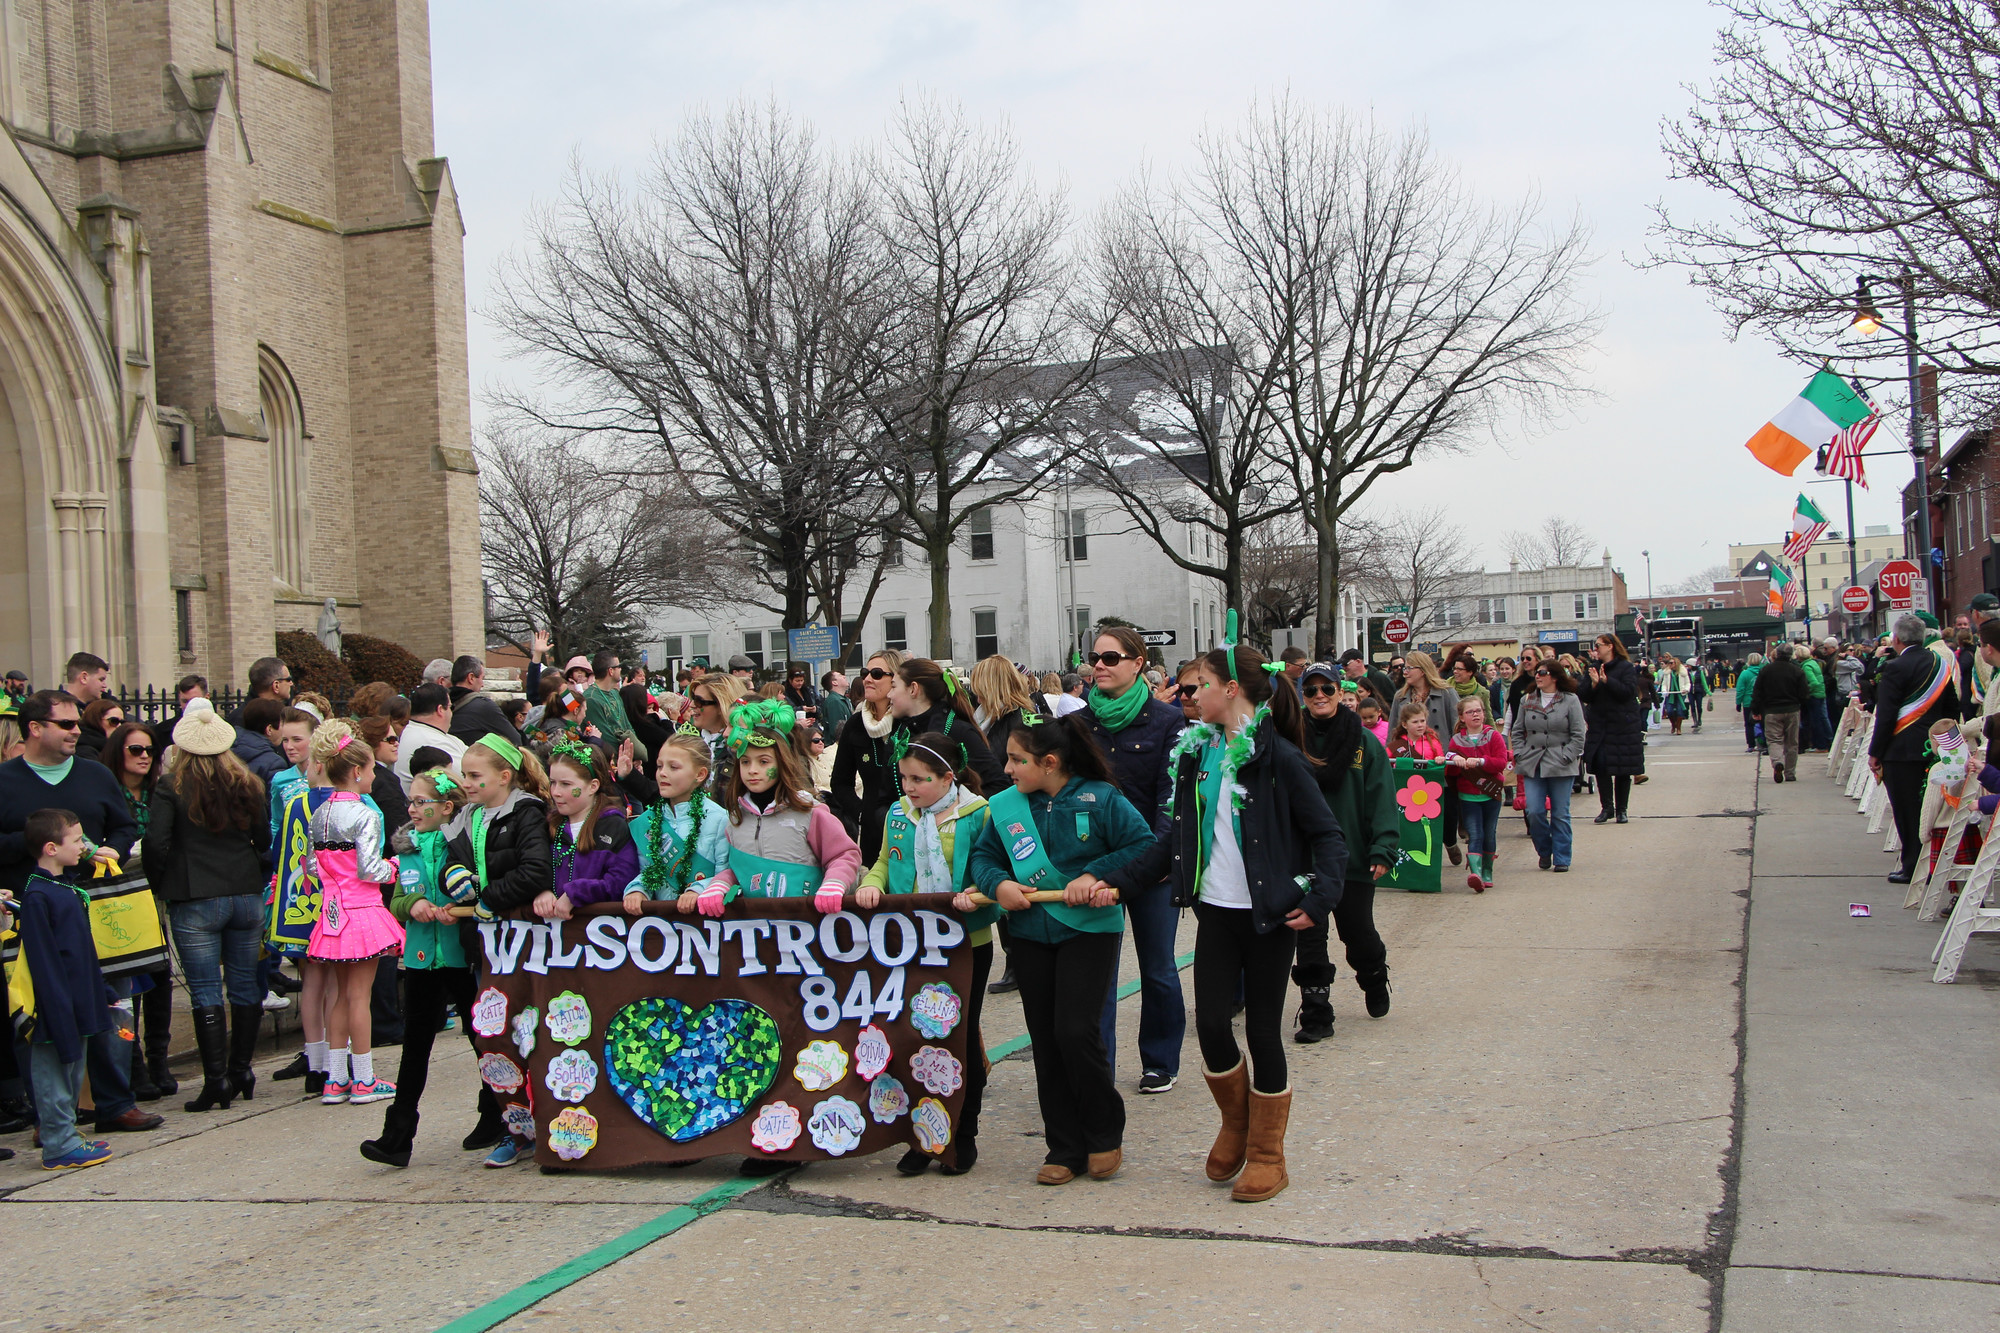 Girl Scouts from Wilson Troop 844 were among many scouts who marched in the parade.